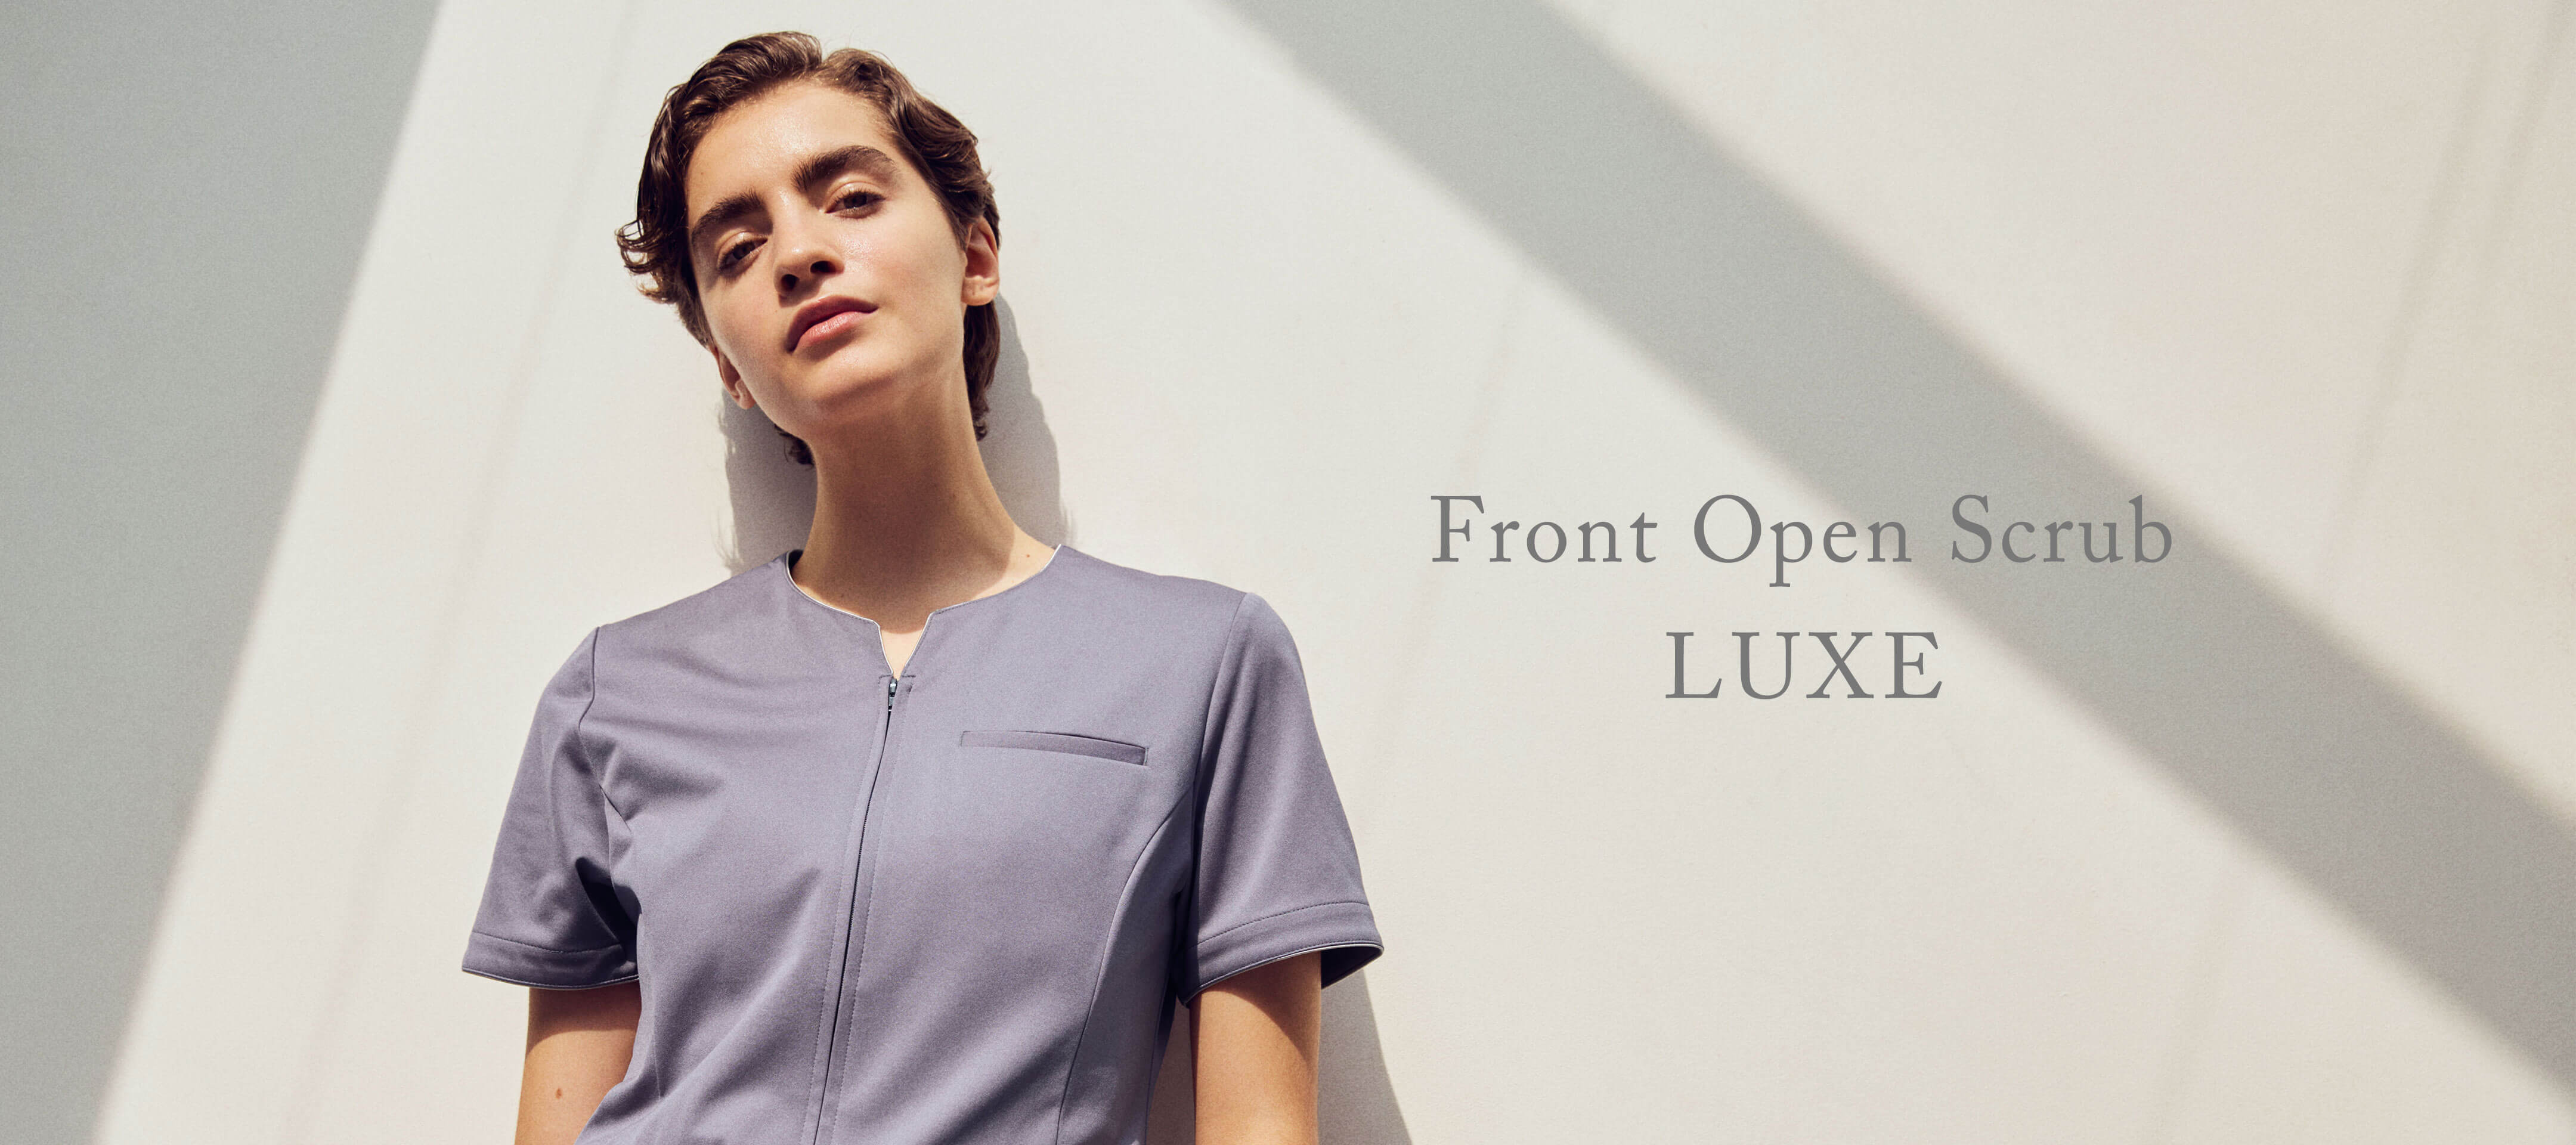 Front Open Scrub LUXE